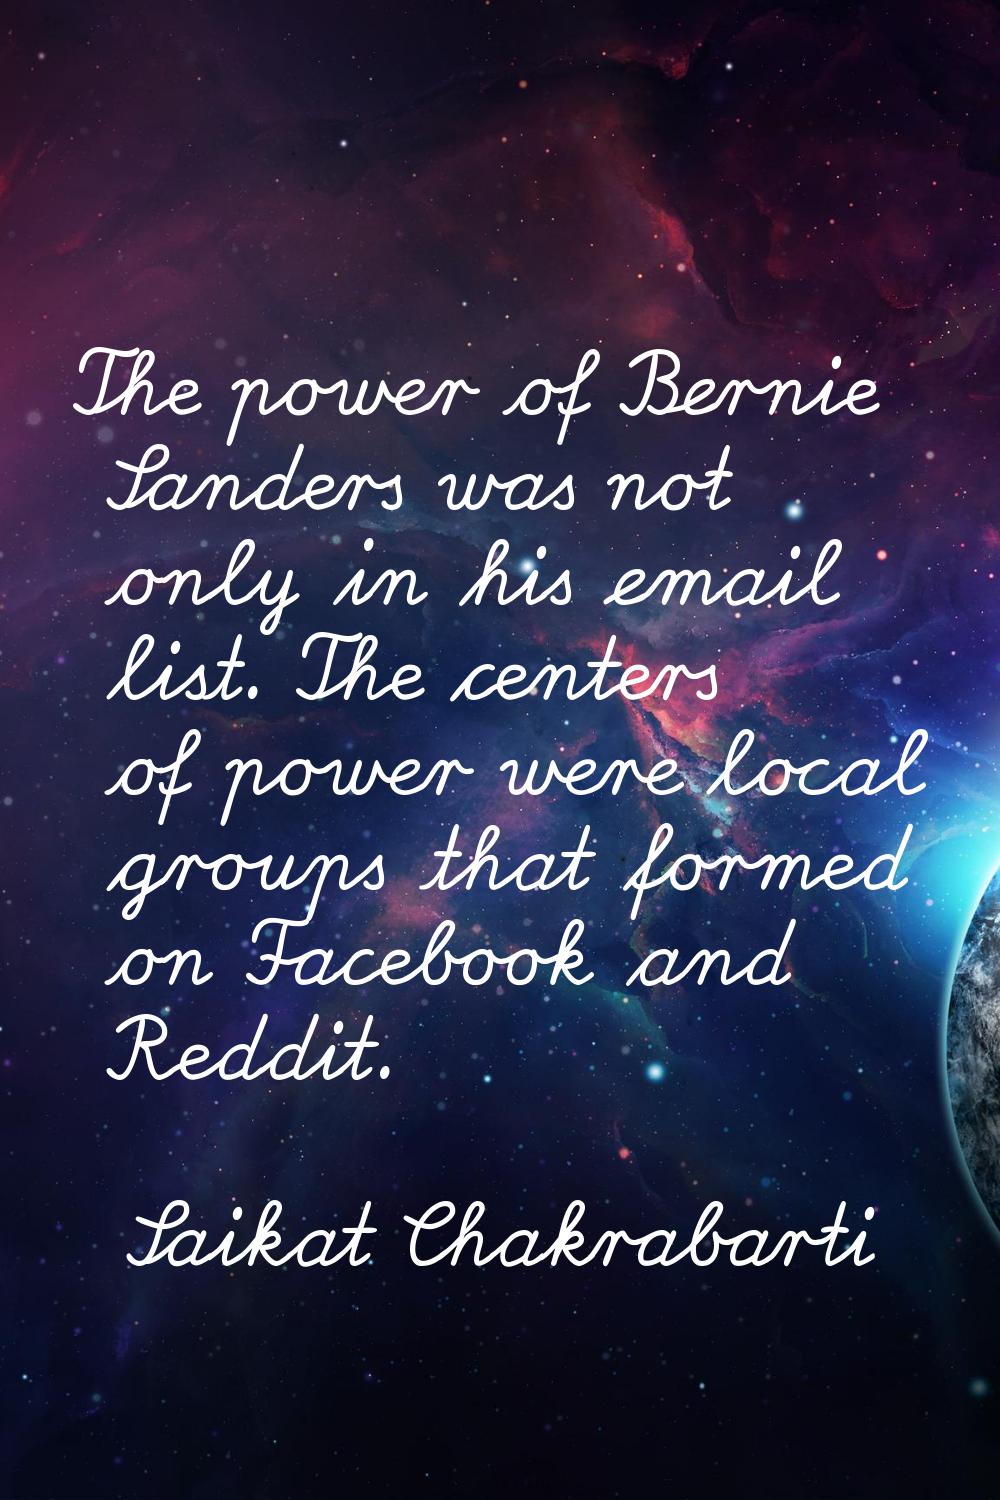 The power of Bernie Sanders was not only in his email list. The centers of power were local groups 